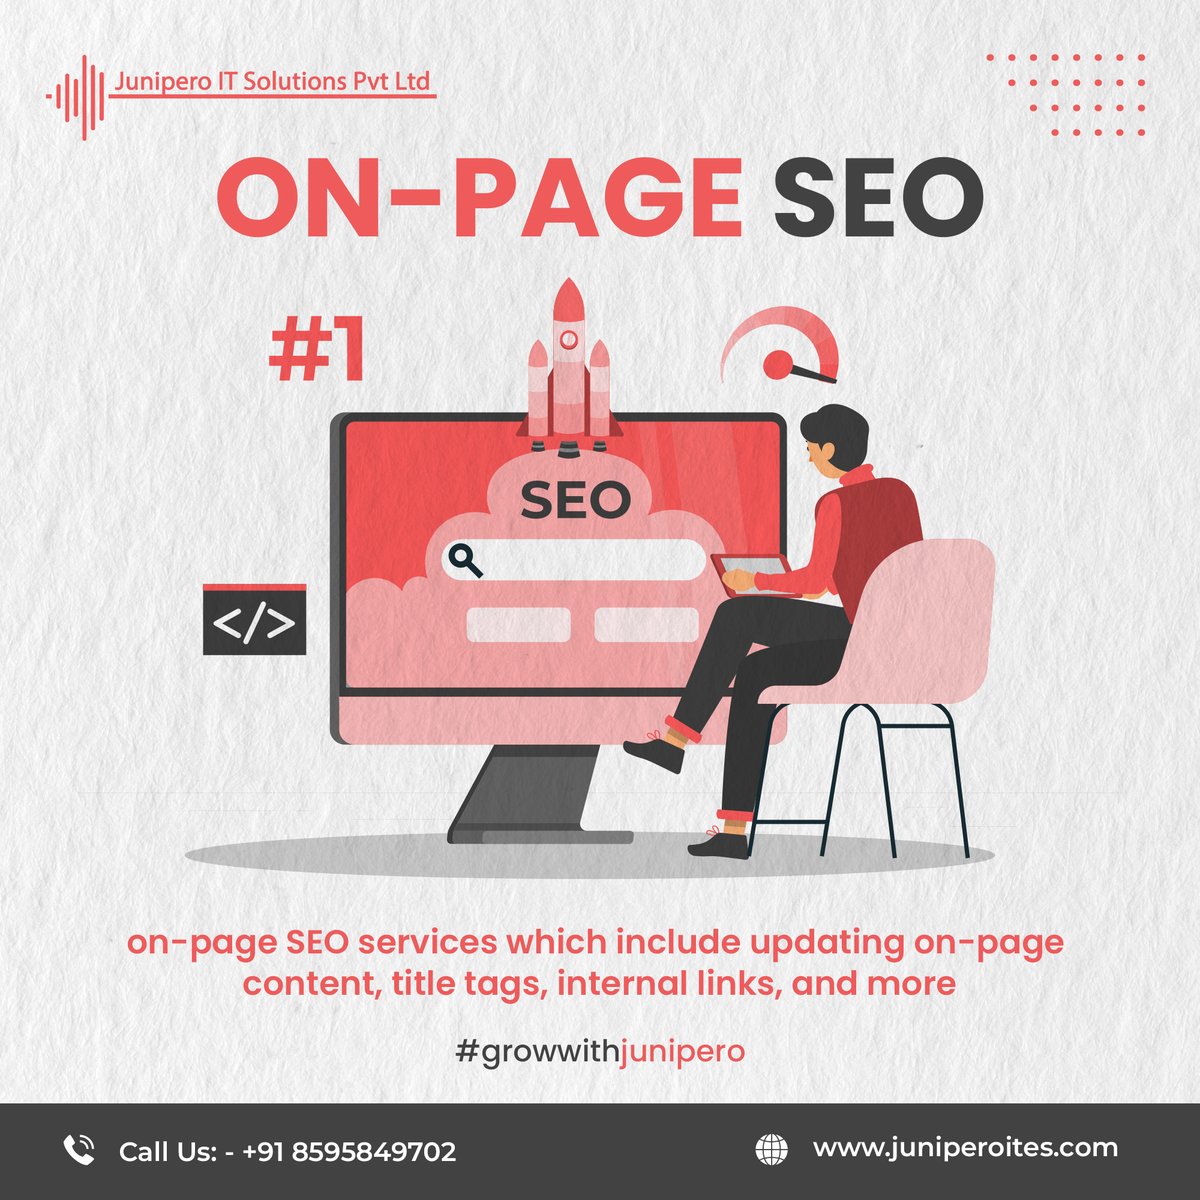 Want help with your ON-Page SEO connect with us right now.
-
-
-
#onpage #seo #urls #images #page #speed #pagespeed #links #growwithjunipero #promotion #searchengineoptimization